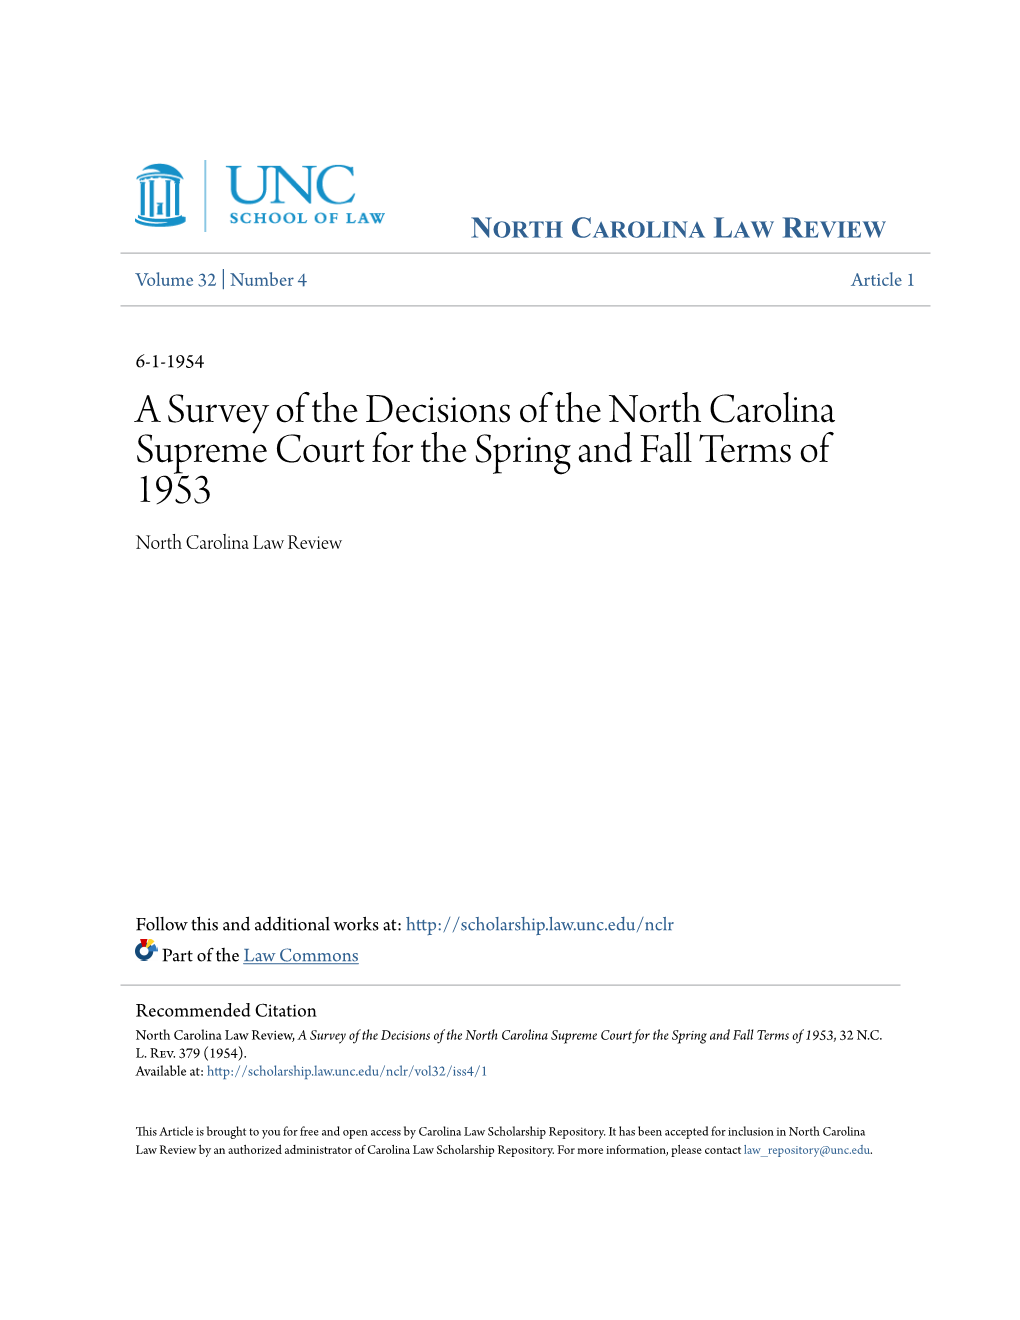 A Survey of the Decisions of the North Carolina Supreme Court for the Spring and Fall Terms of 1953 North Carolina Law Review